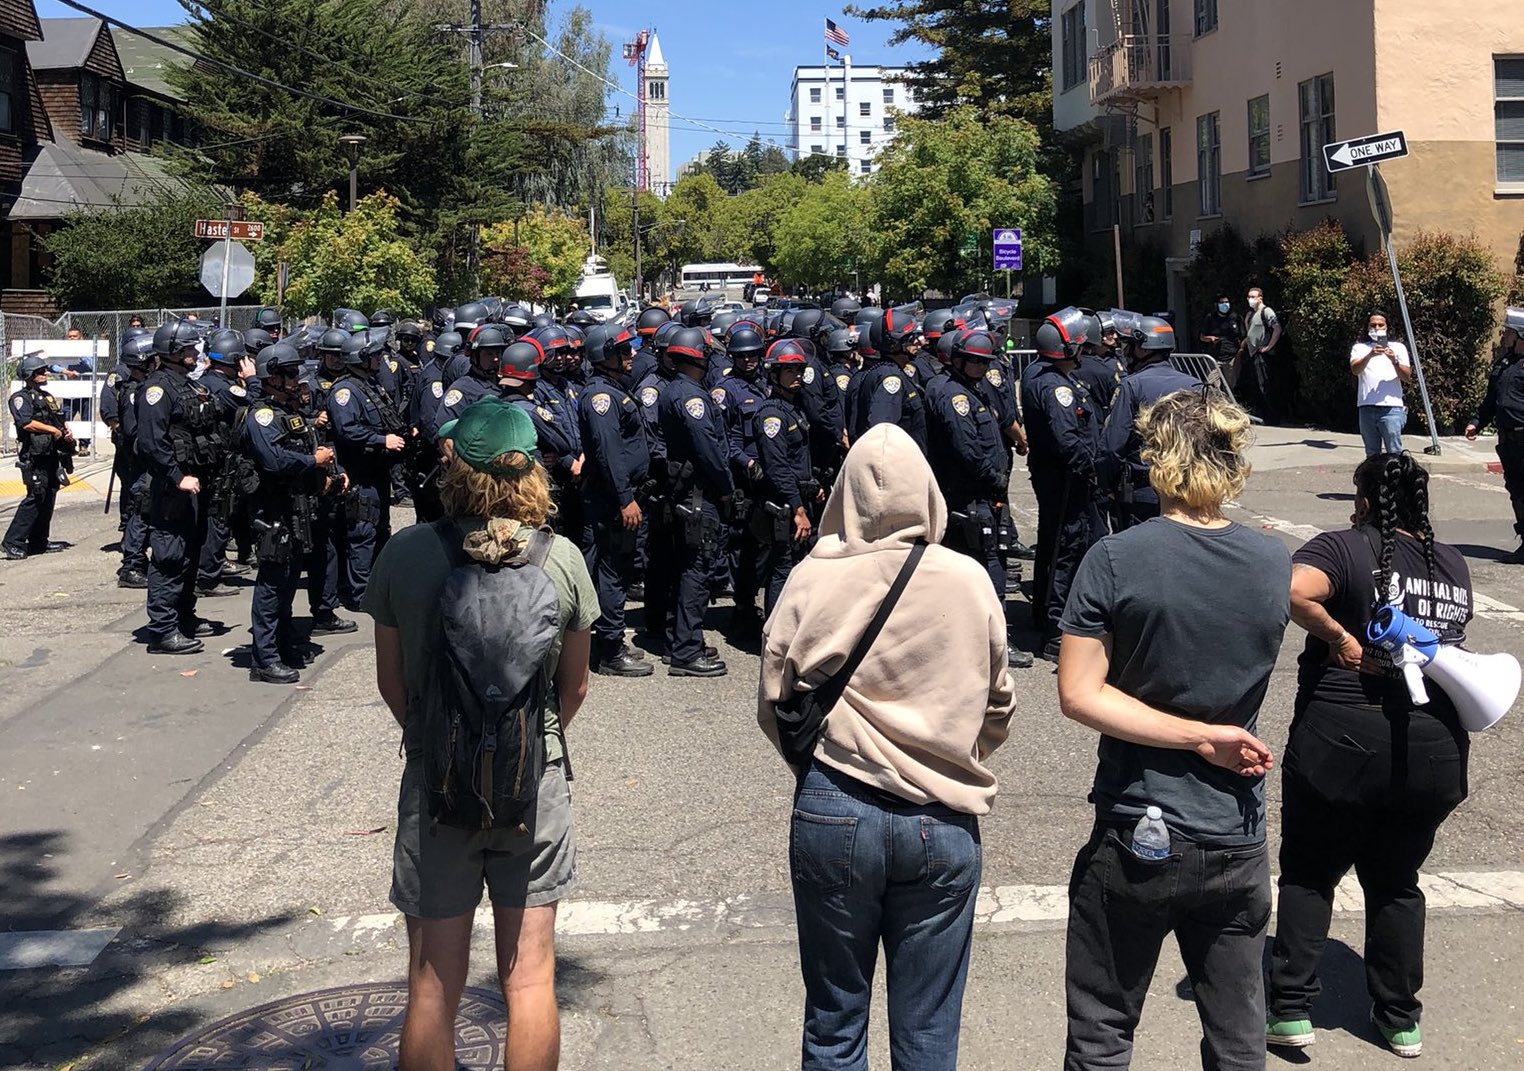 People on the street watch as a large group of police in riot gear stand in a group.